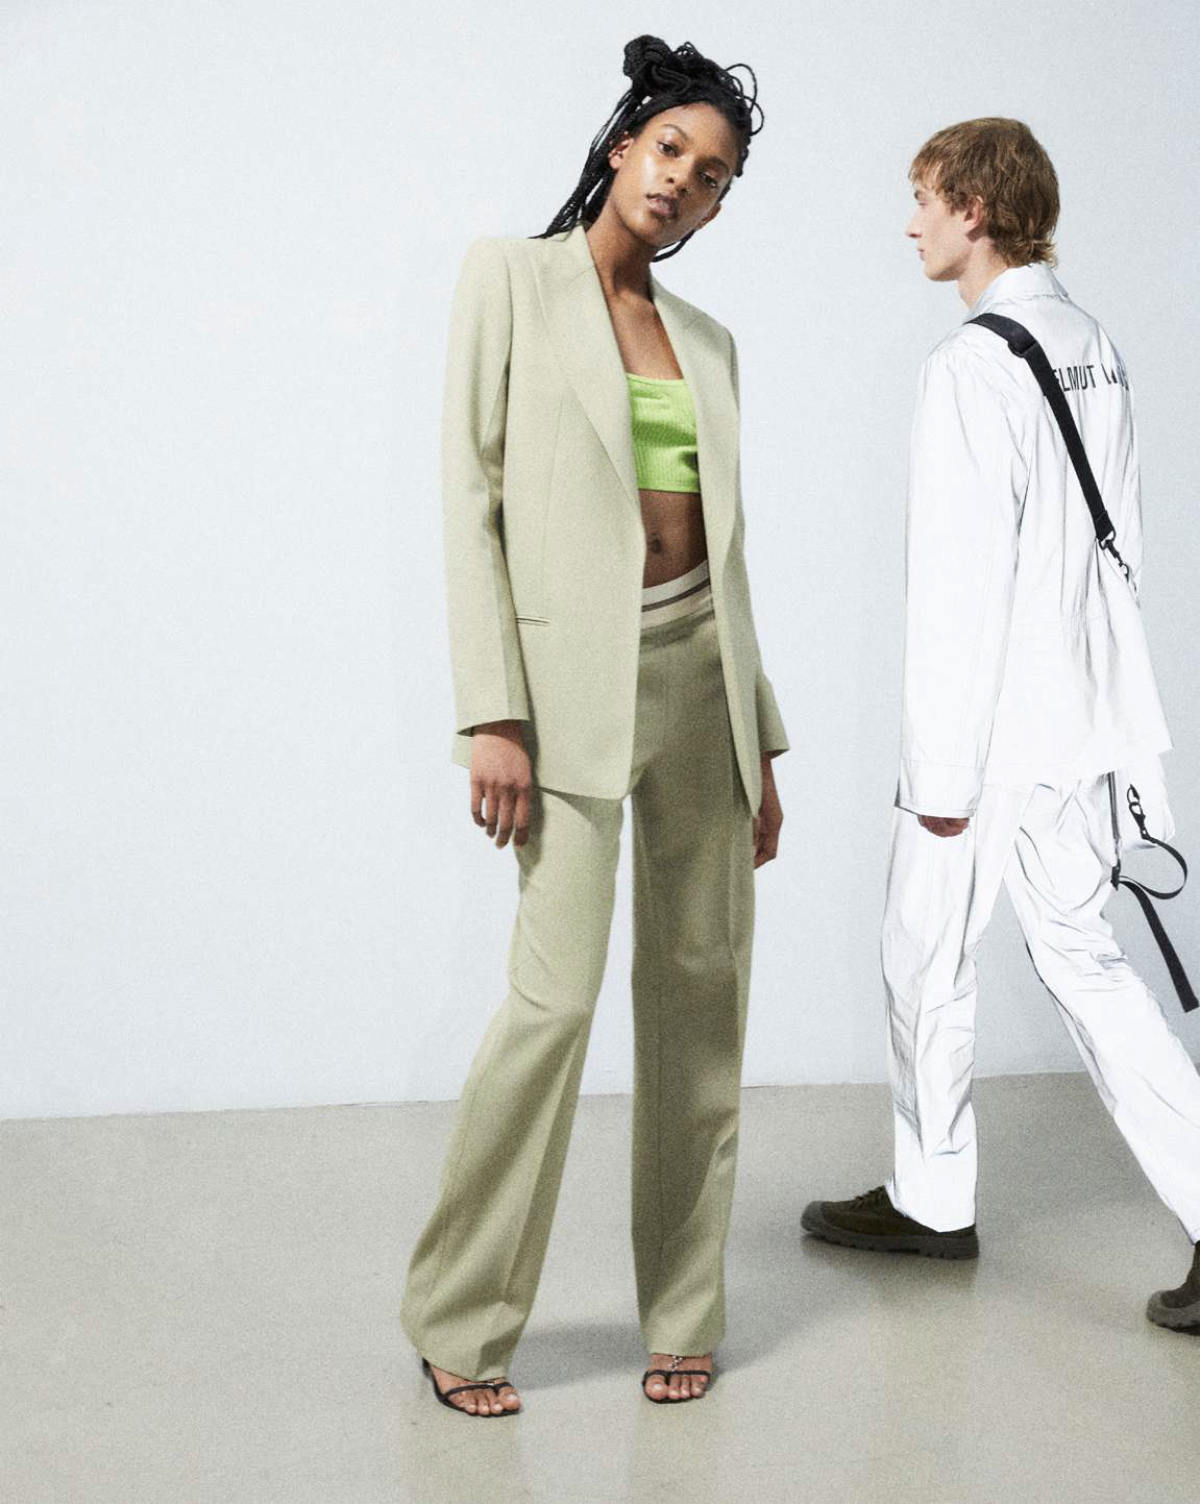 Helmut Lang Presents Its New Pre-Fall 2022 Womenswear Collection